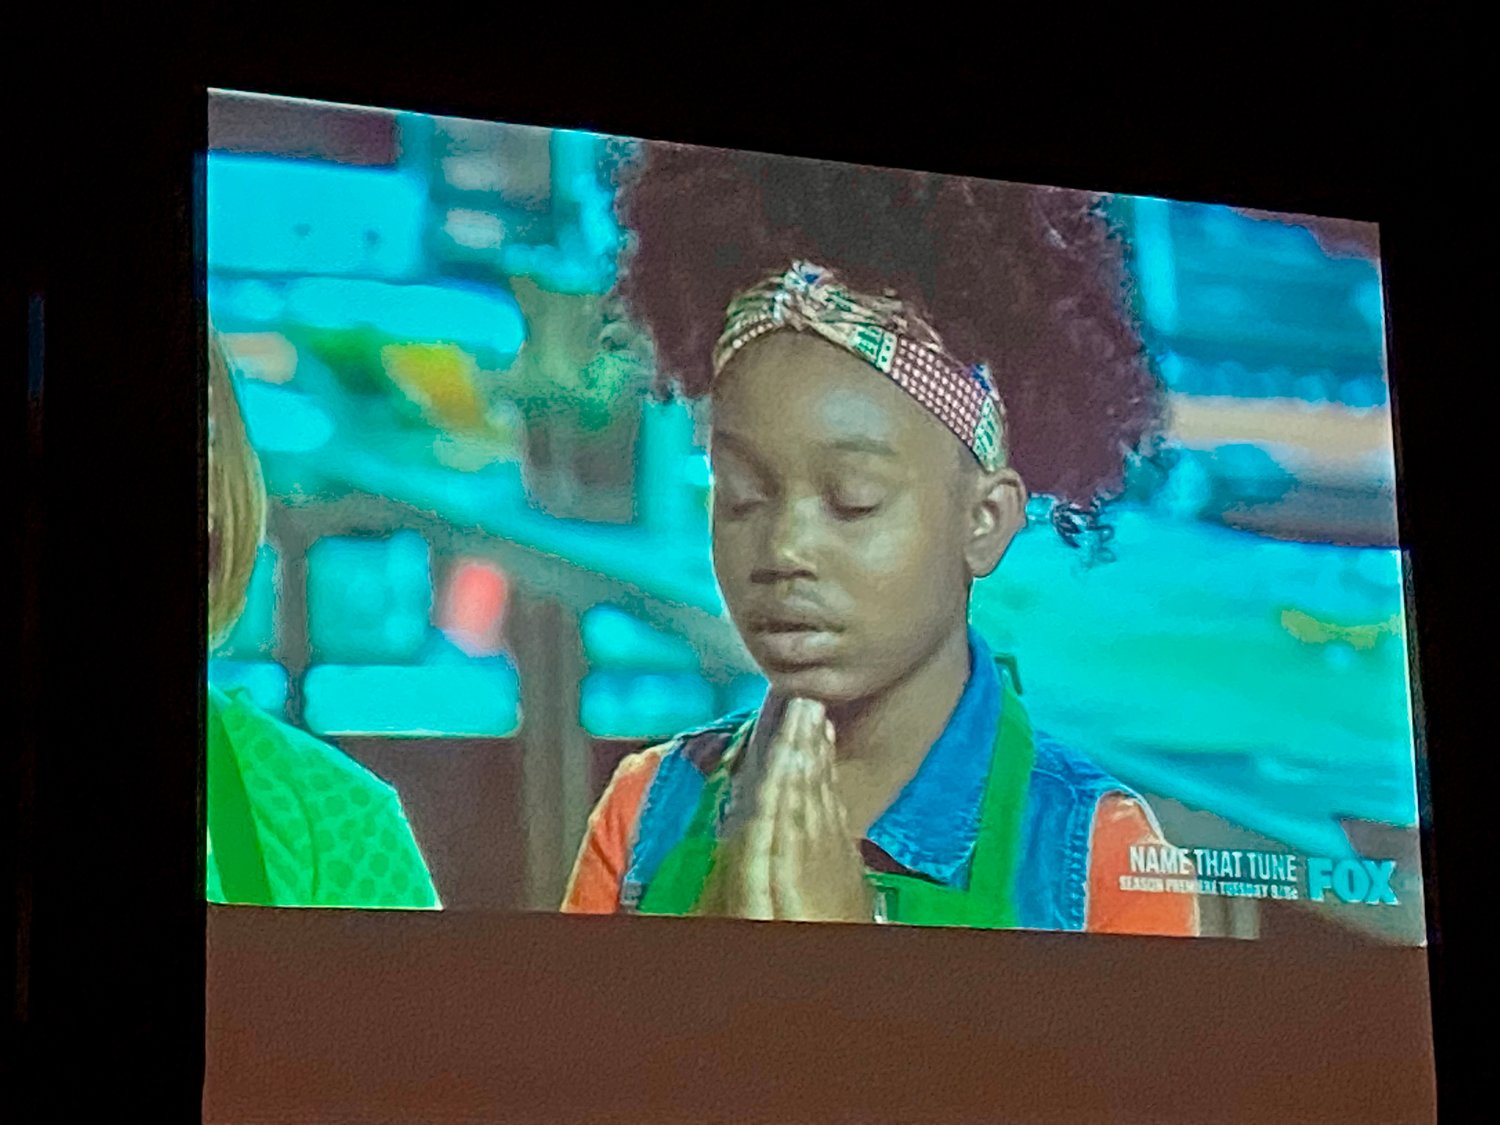 Family and friends of Starla Chapman watched her pray her way through the second week of competition on a big screen at the Performing Arts Center at Coastal Alabama Community College.